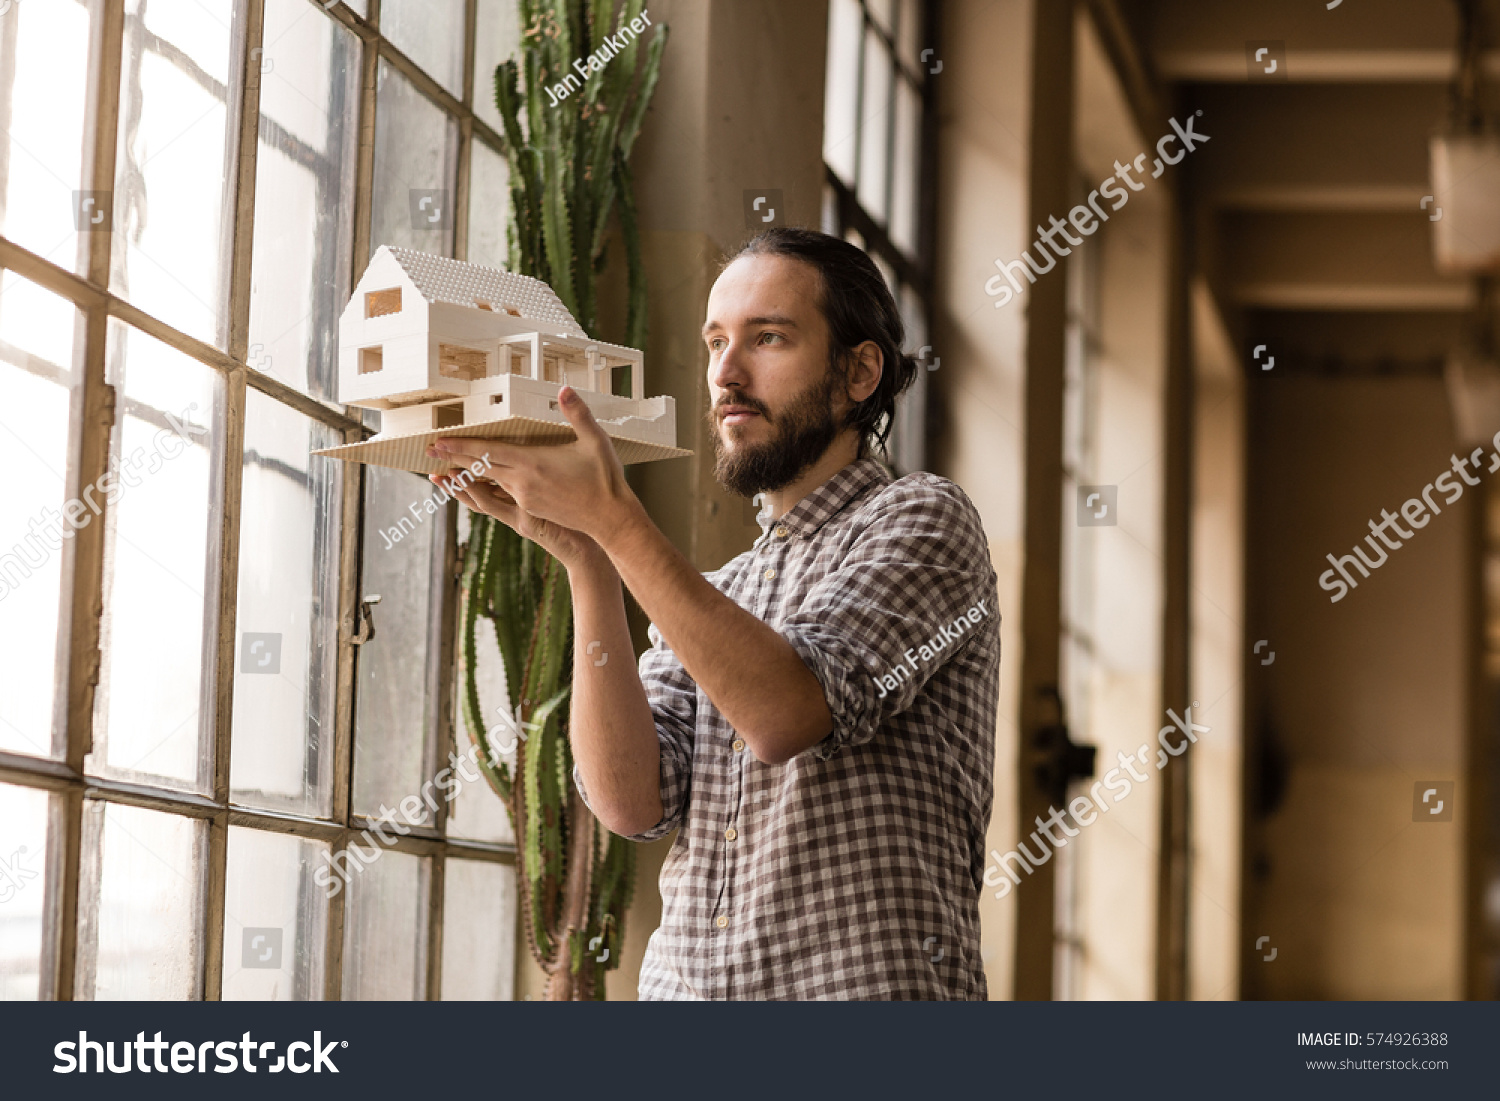 Young architect is looking on the new model in the old industrial space with big factory windows. Man is standing in front of window and holding small model of the house. Color toned image. #574926388